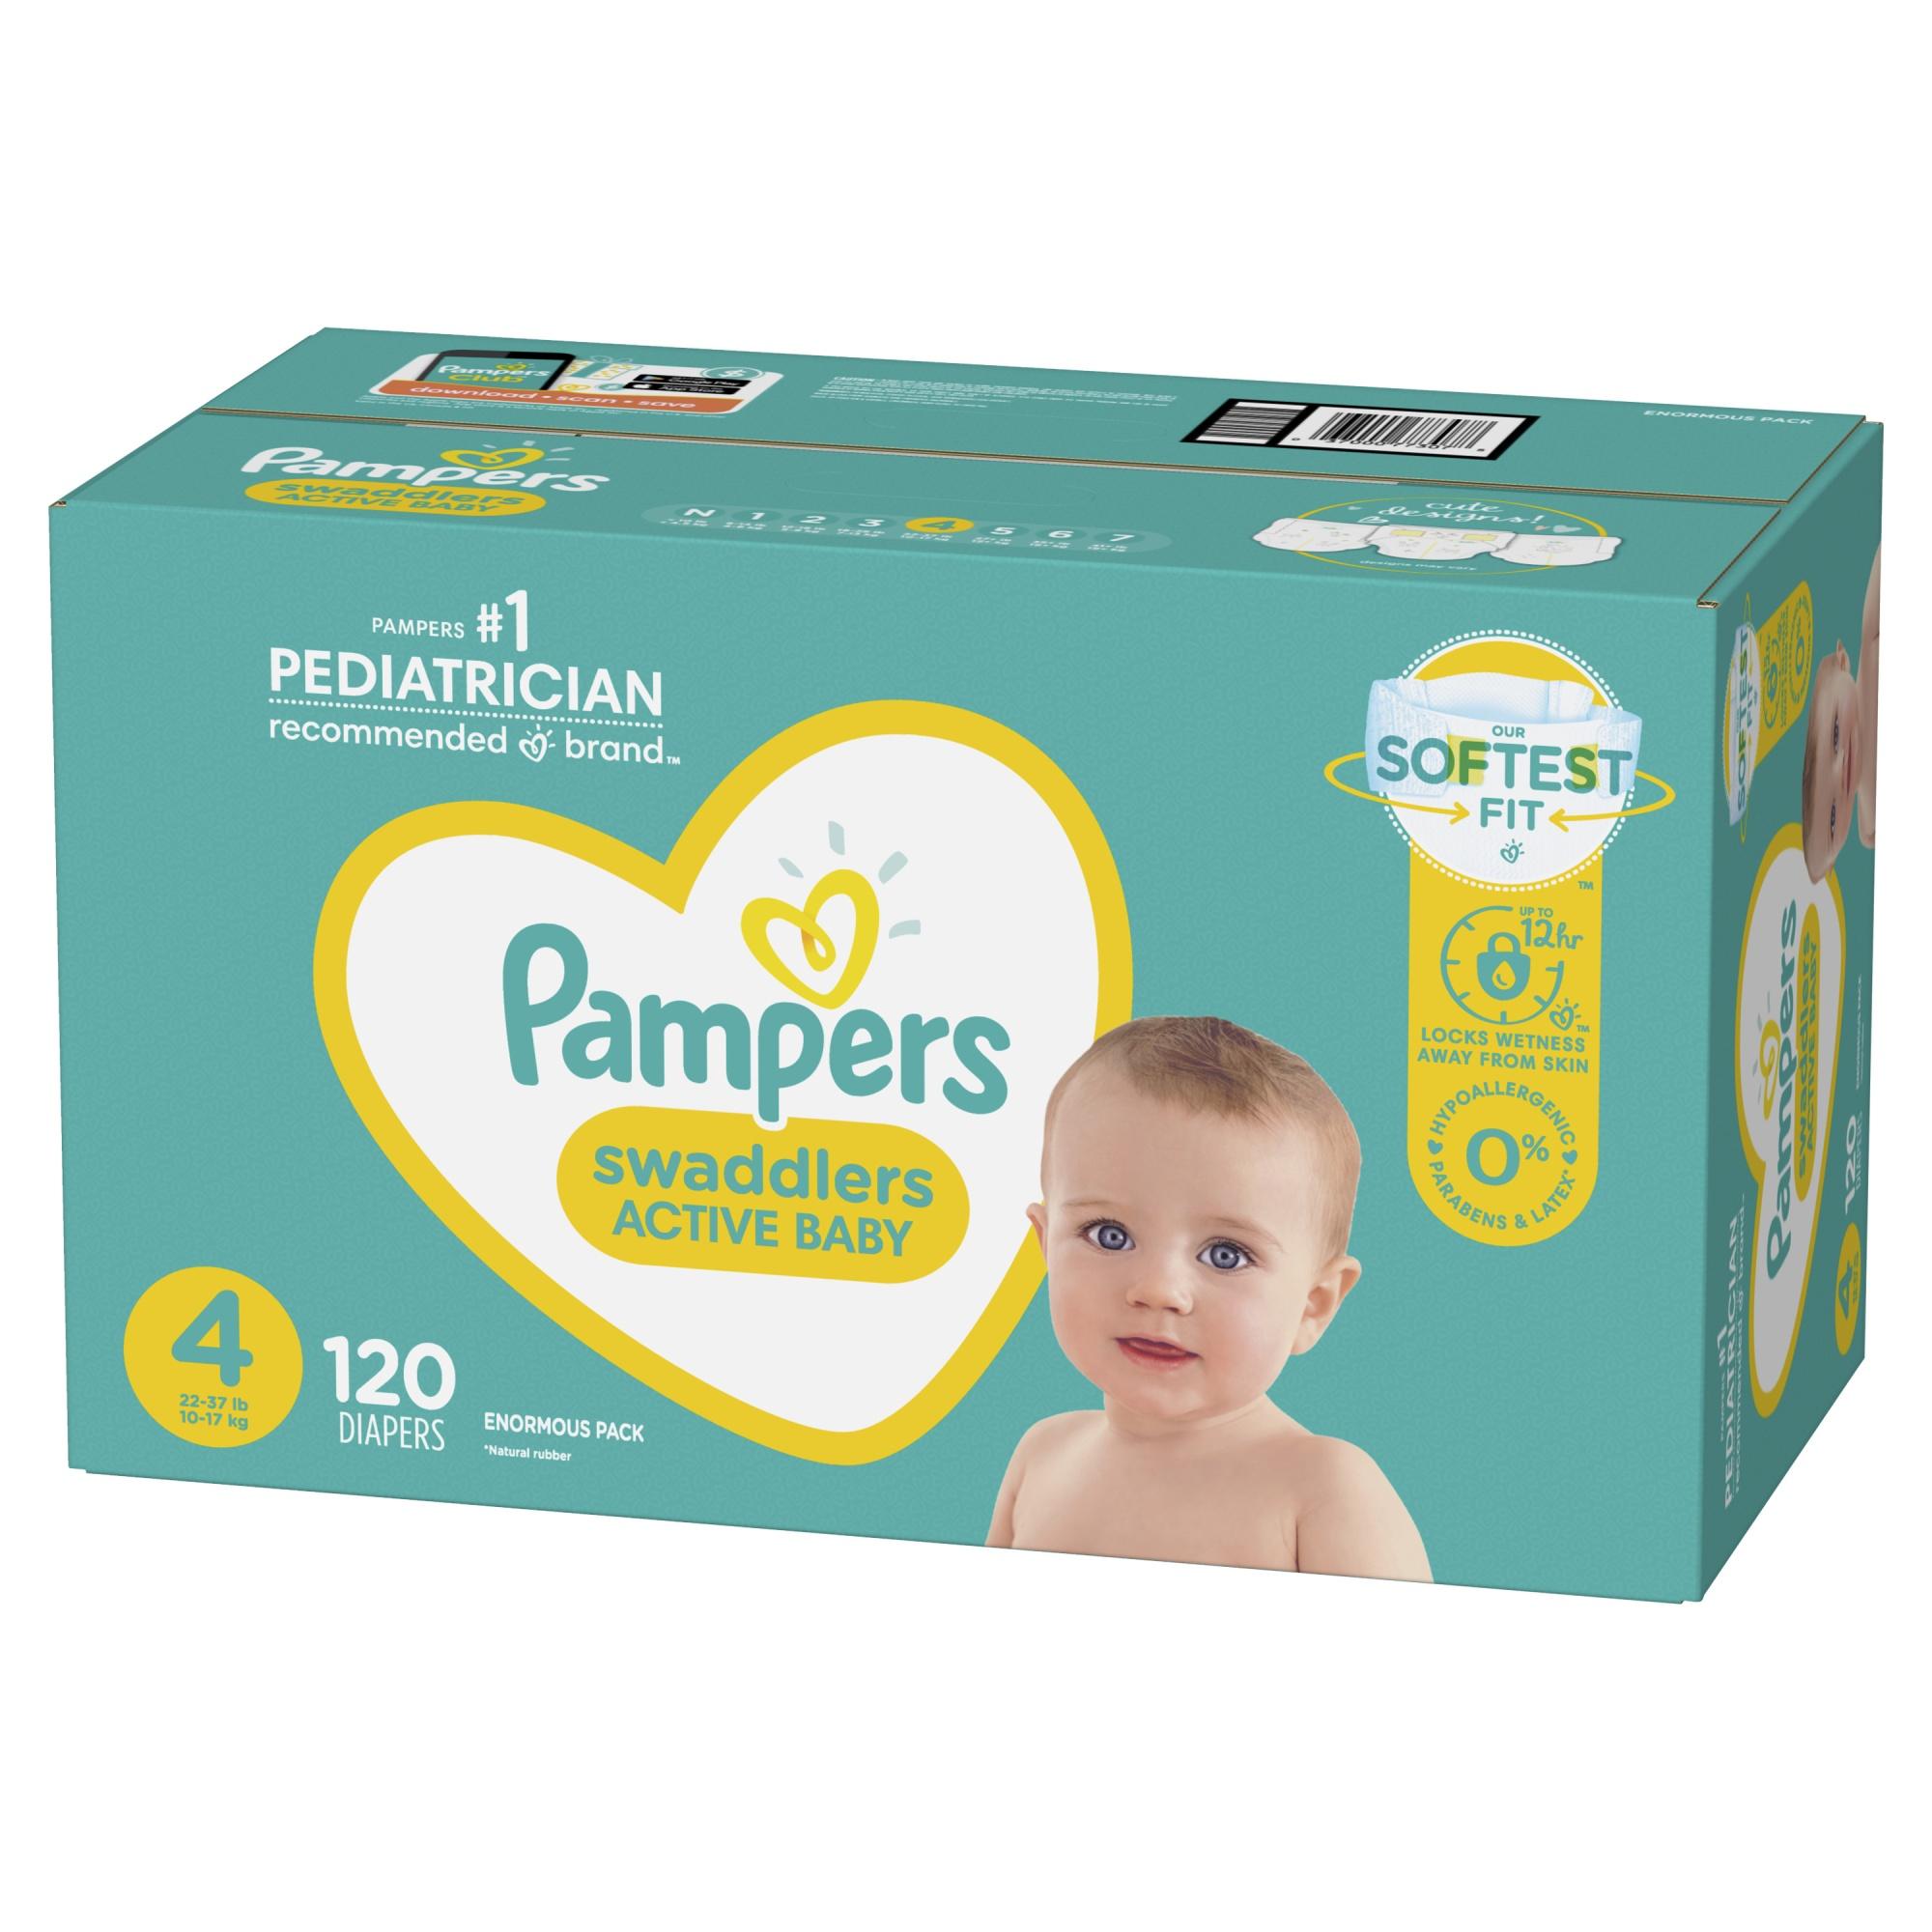  Pampers Swaddlers - Pañales desechables muy suaves